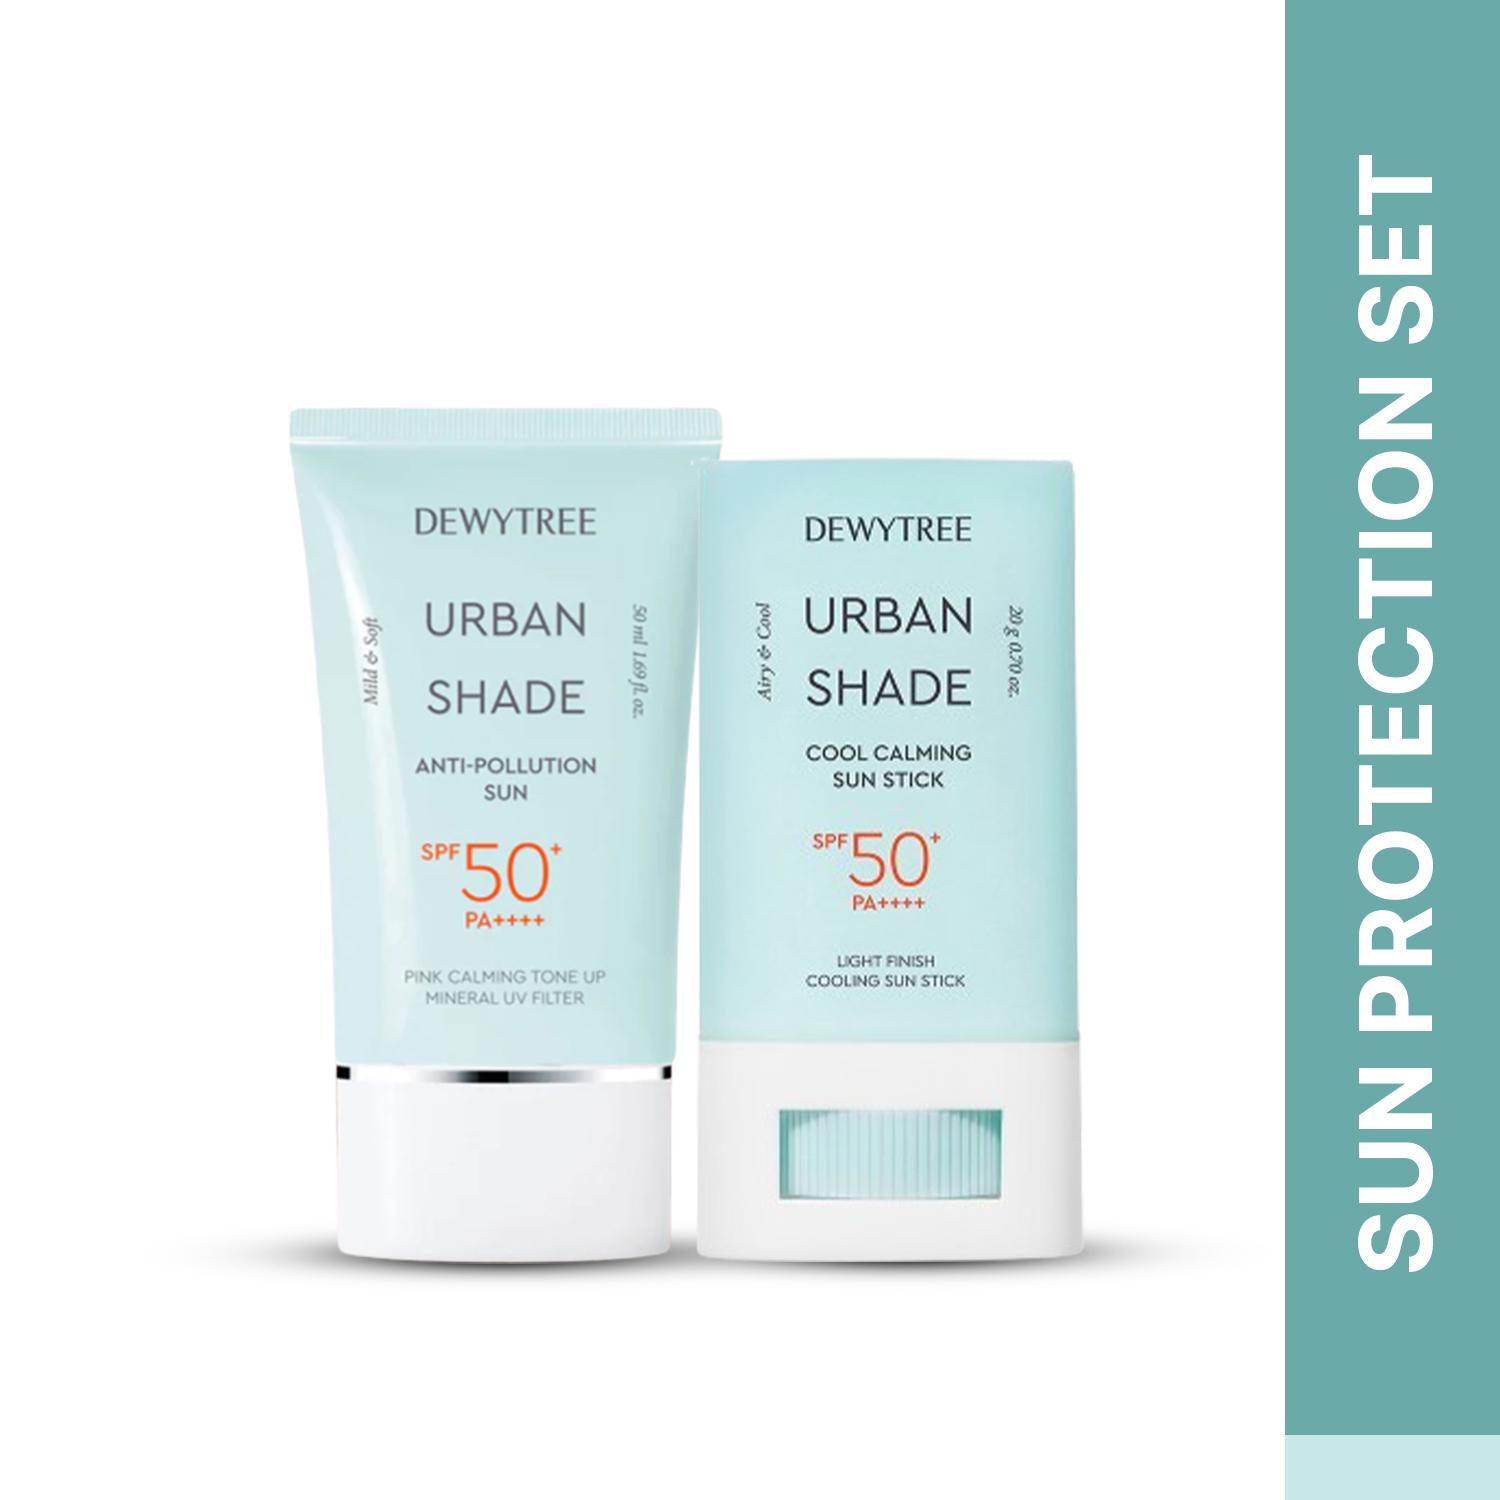 Dewytree Urban Shade Anti-Pollution Sunscreen And Cool Calming Sun Stick Combo